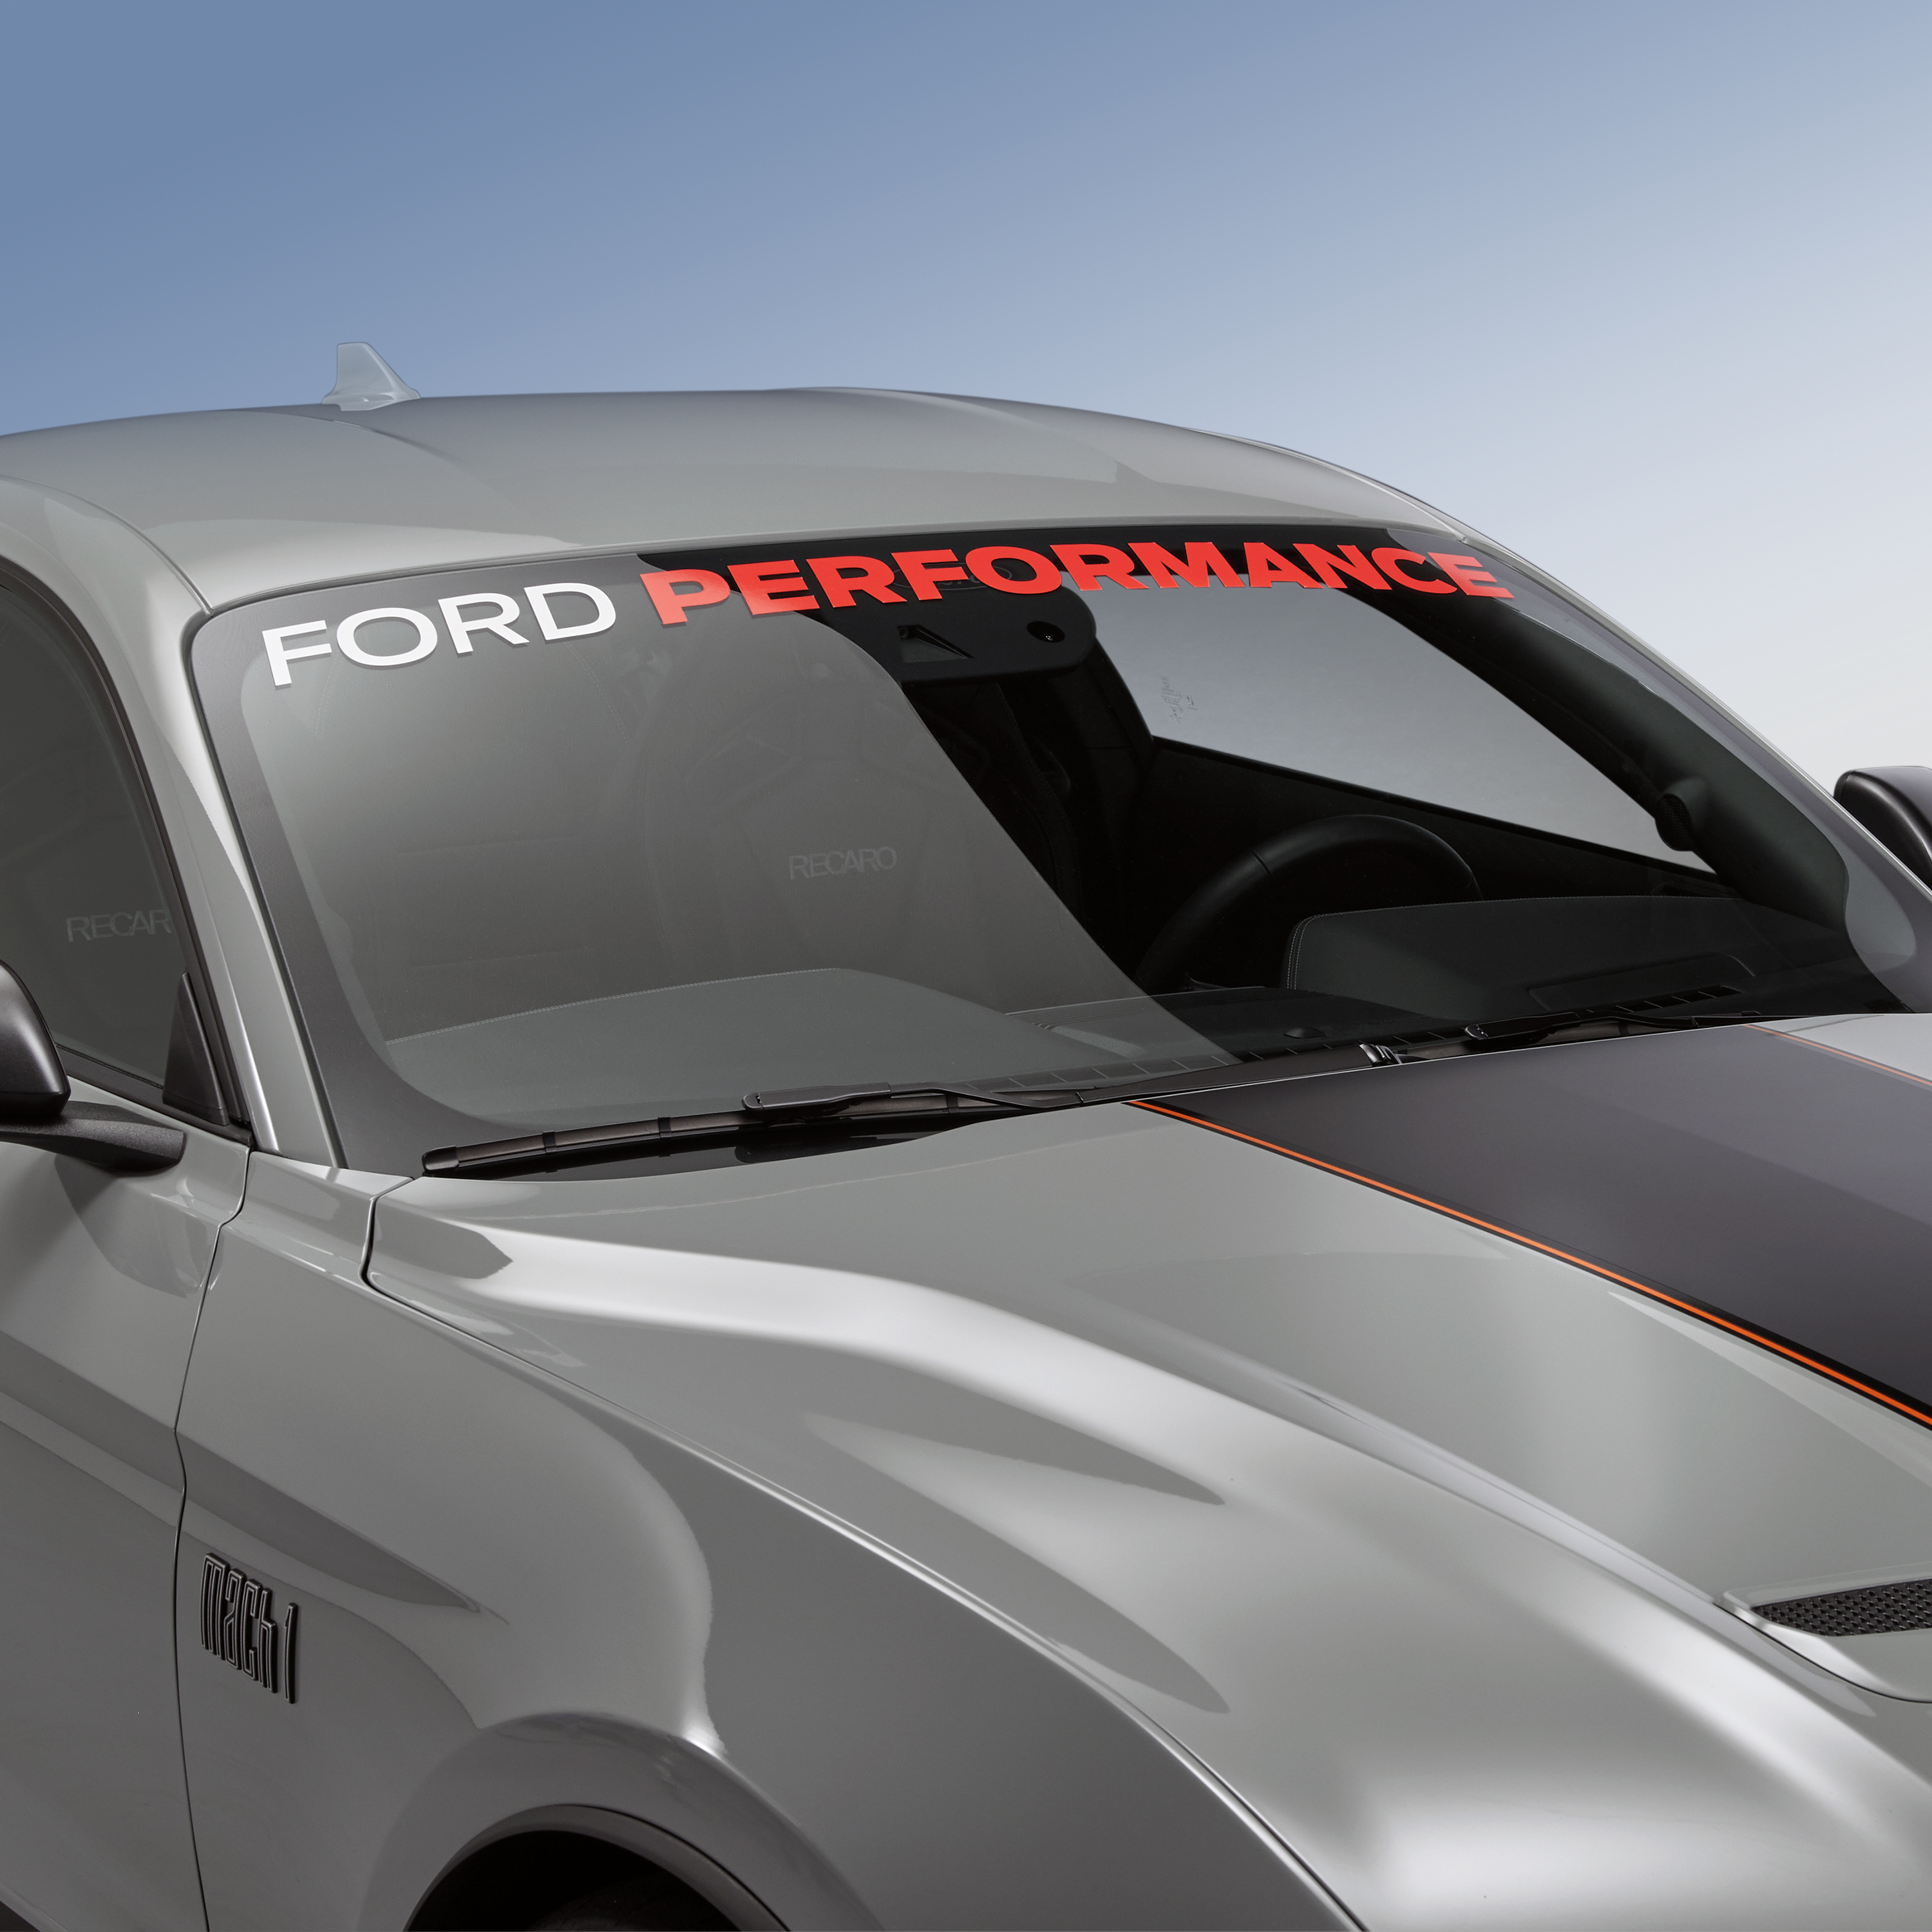 Ford Windshield Decal Maker